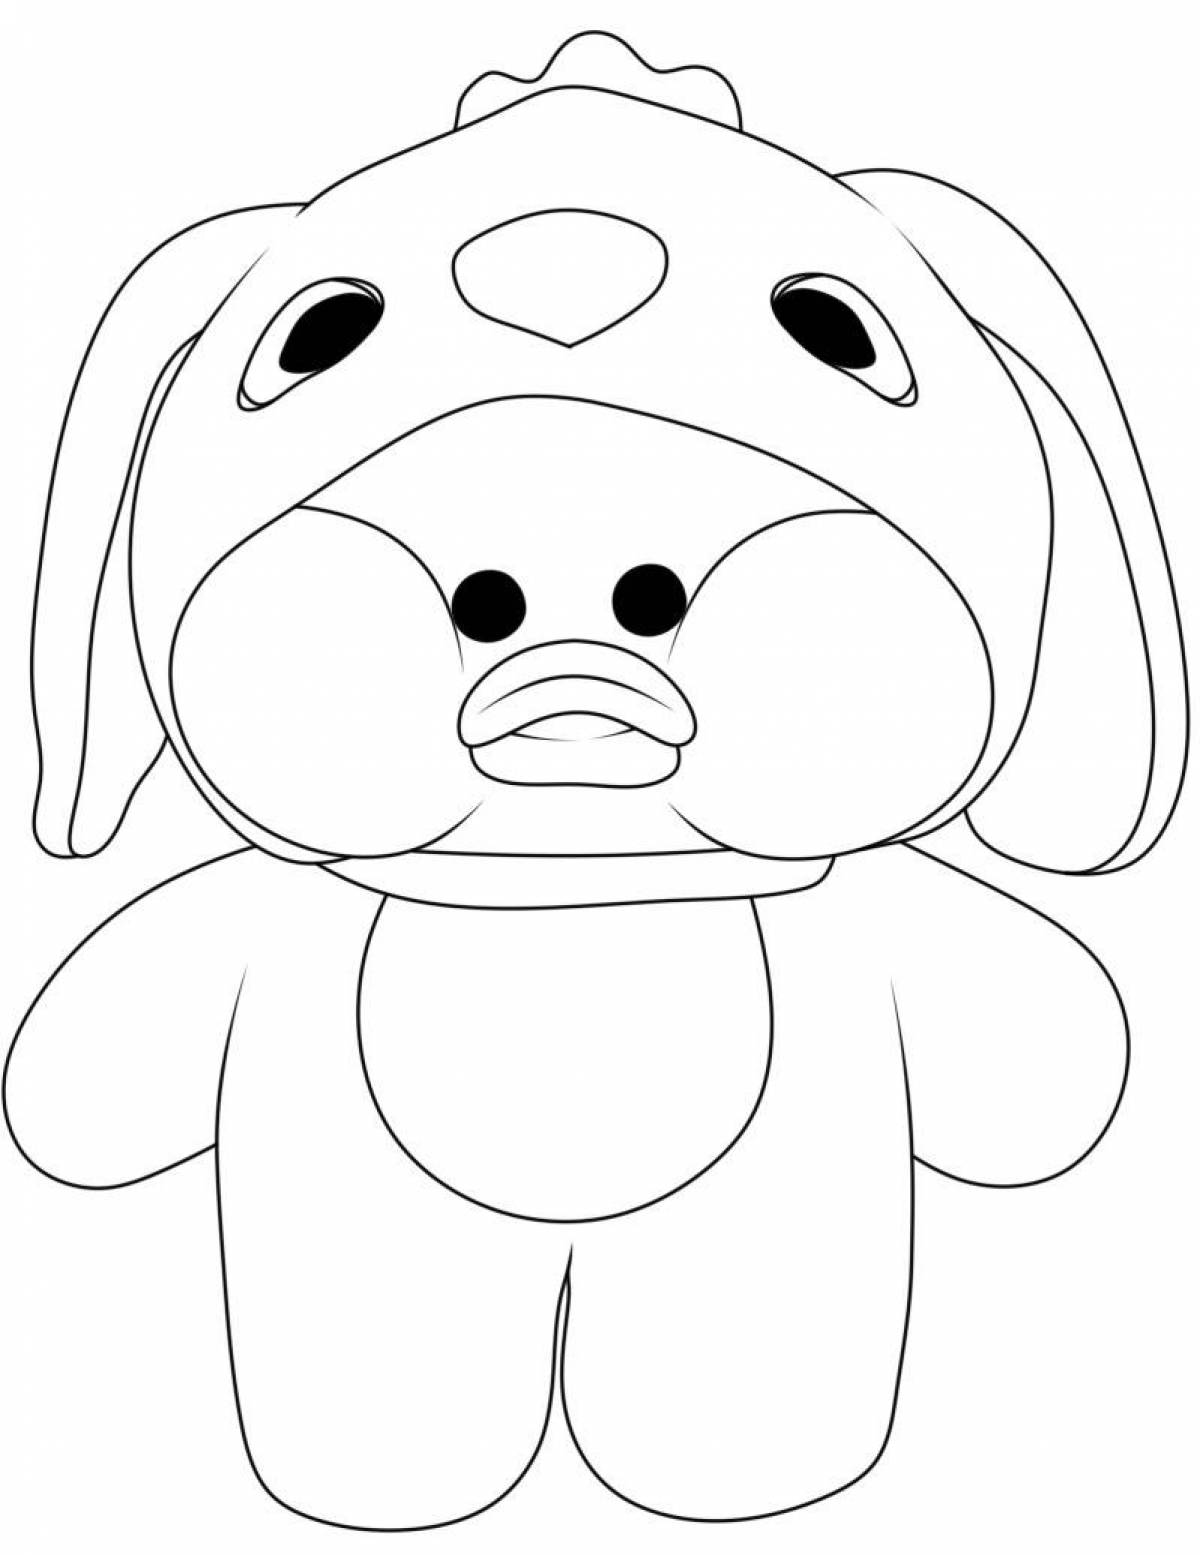 Lalafanfan colorful duck coloring page